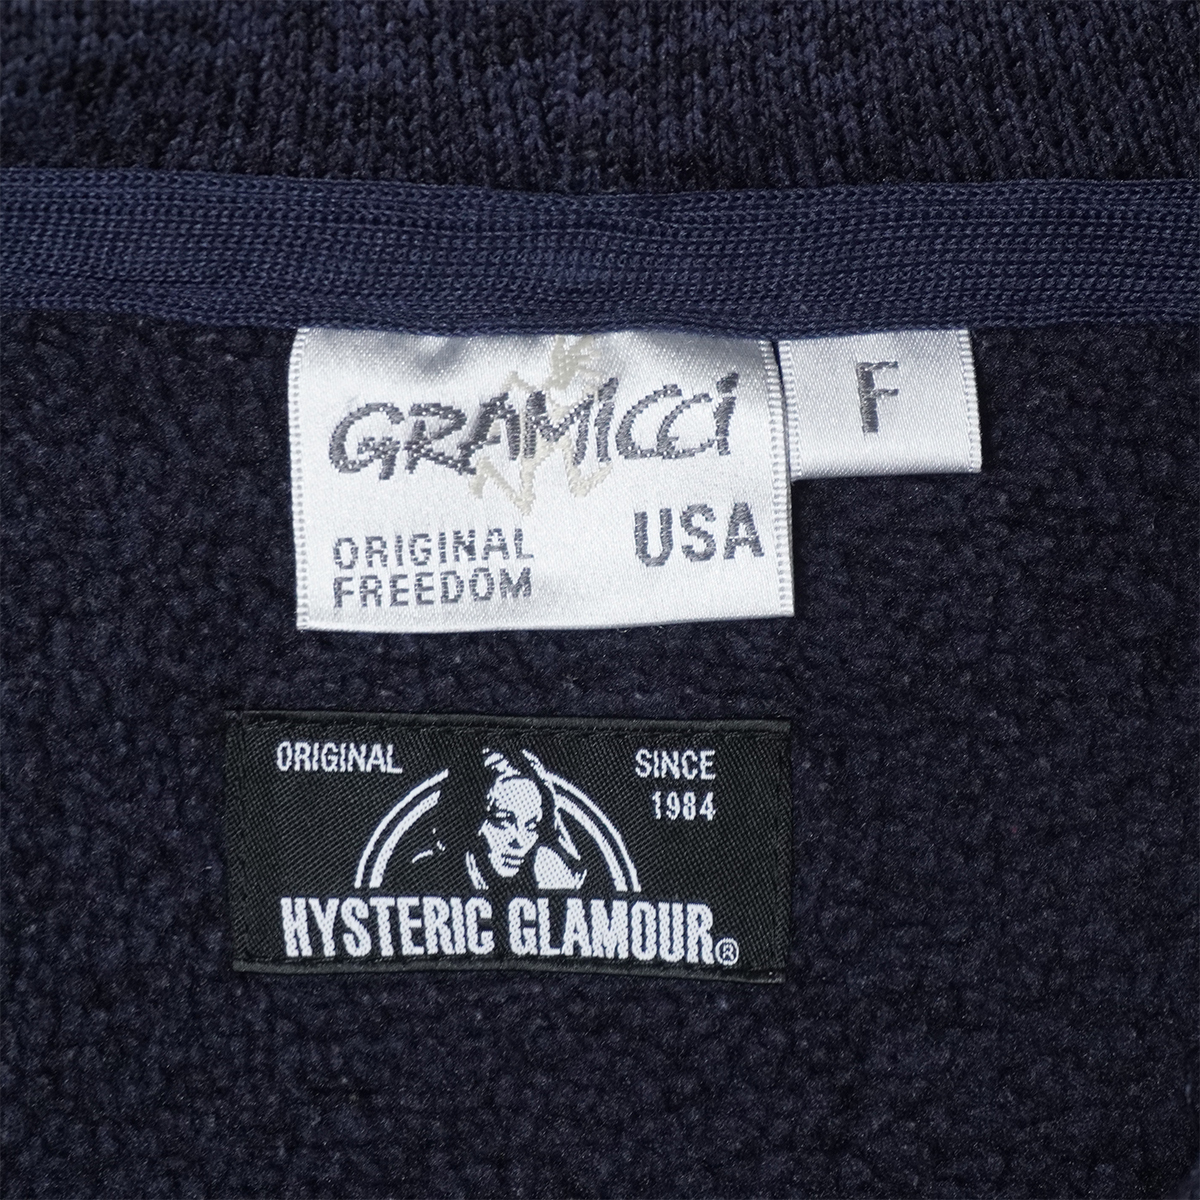 GRAMICCI × HYSTERIC special order fleece setup [F]NAVY Gramicci Hysteric Glamour Parker rib pants rare 0153CP01/0153CF01